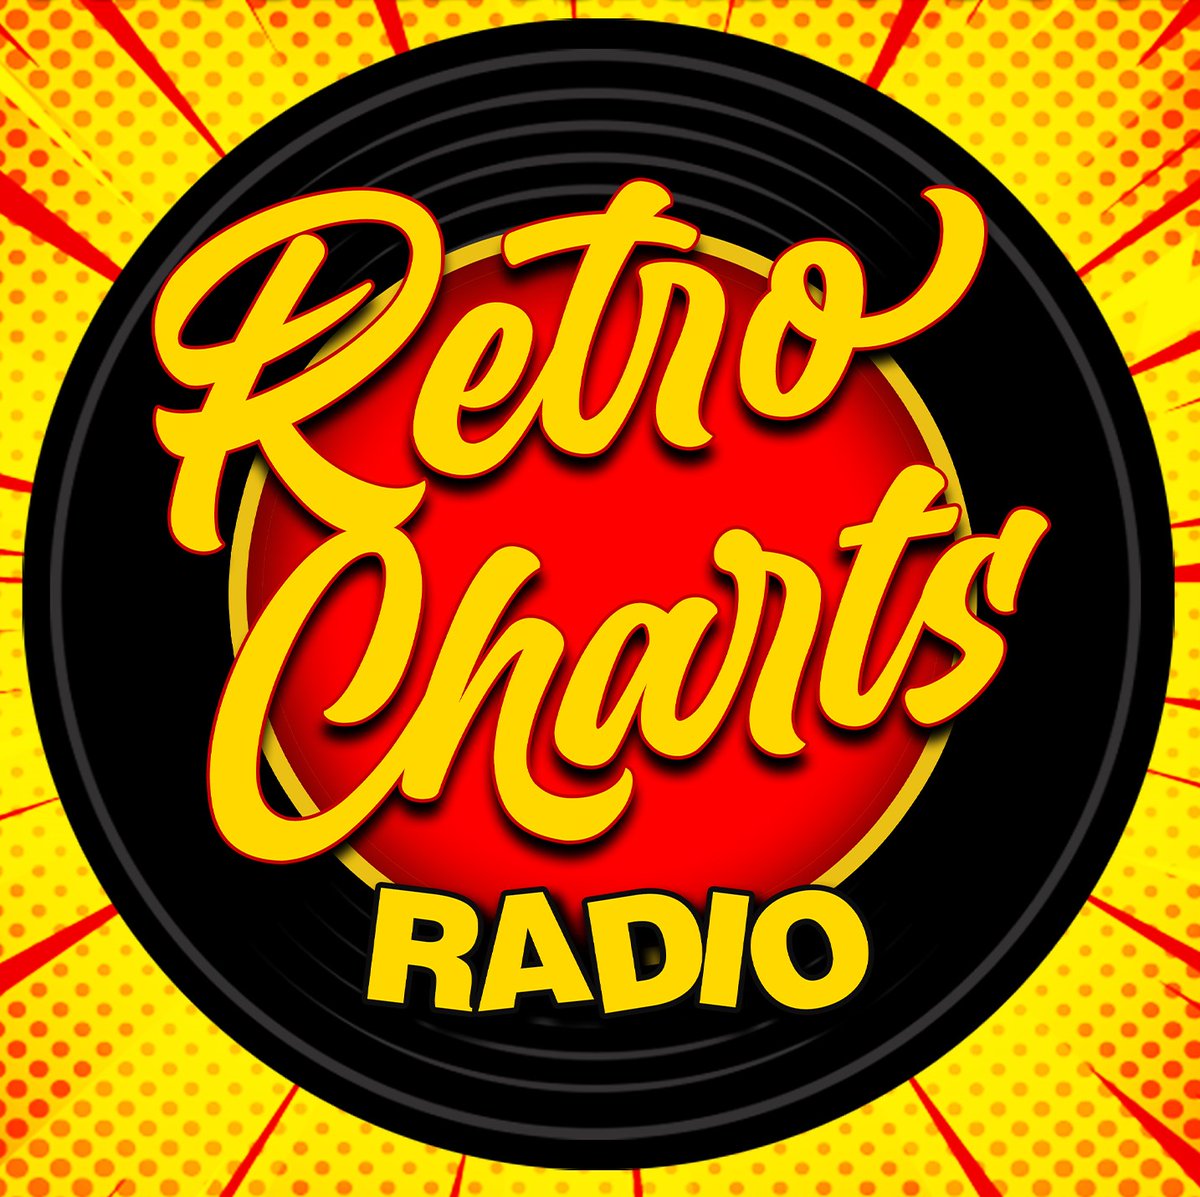 Retro Charts Radio is a fully licenced station featuring a historic archive of the entire UK Top 40 from the 20th century. The station also displays the highest chart position and year of chart entry of each hit played. Tune in to try us out retrochartsradio.co.uk🙂